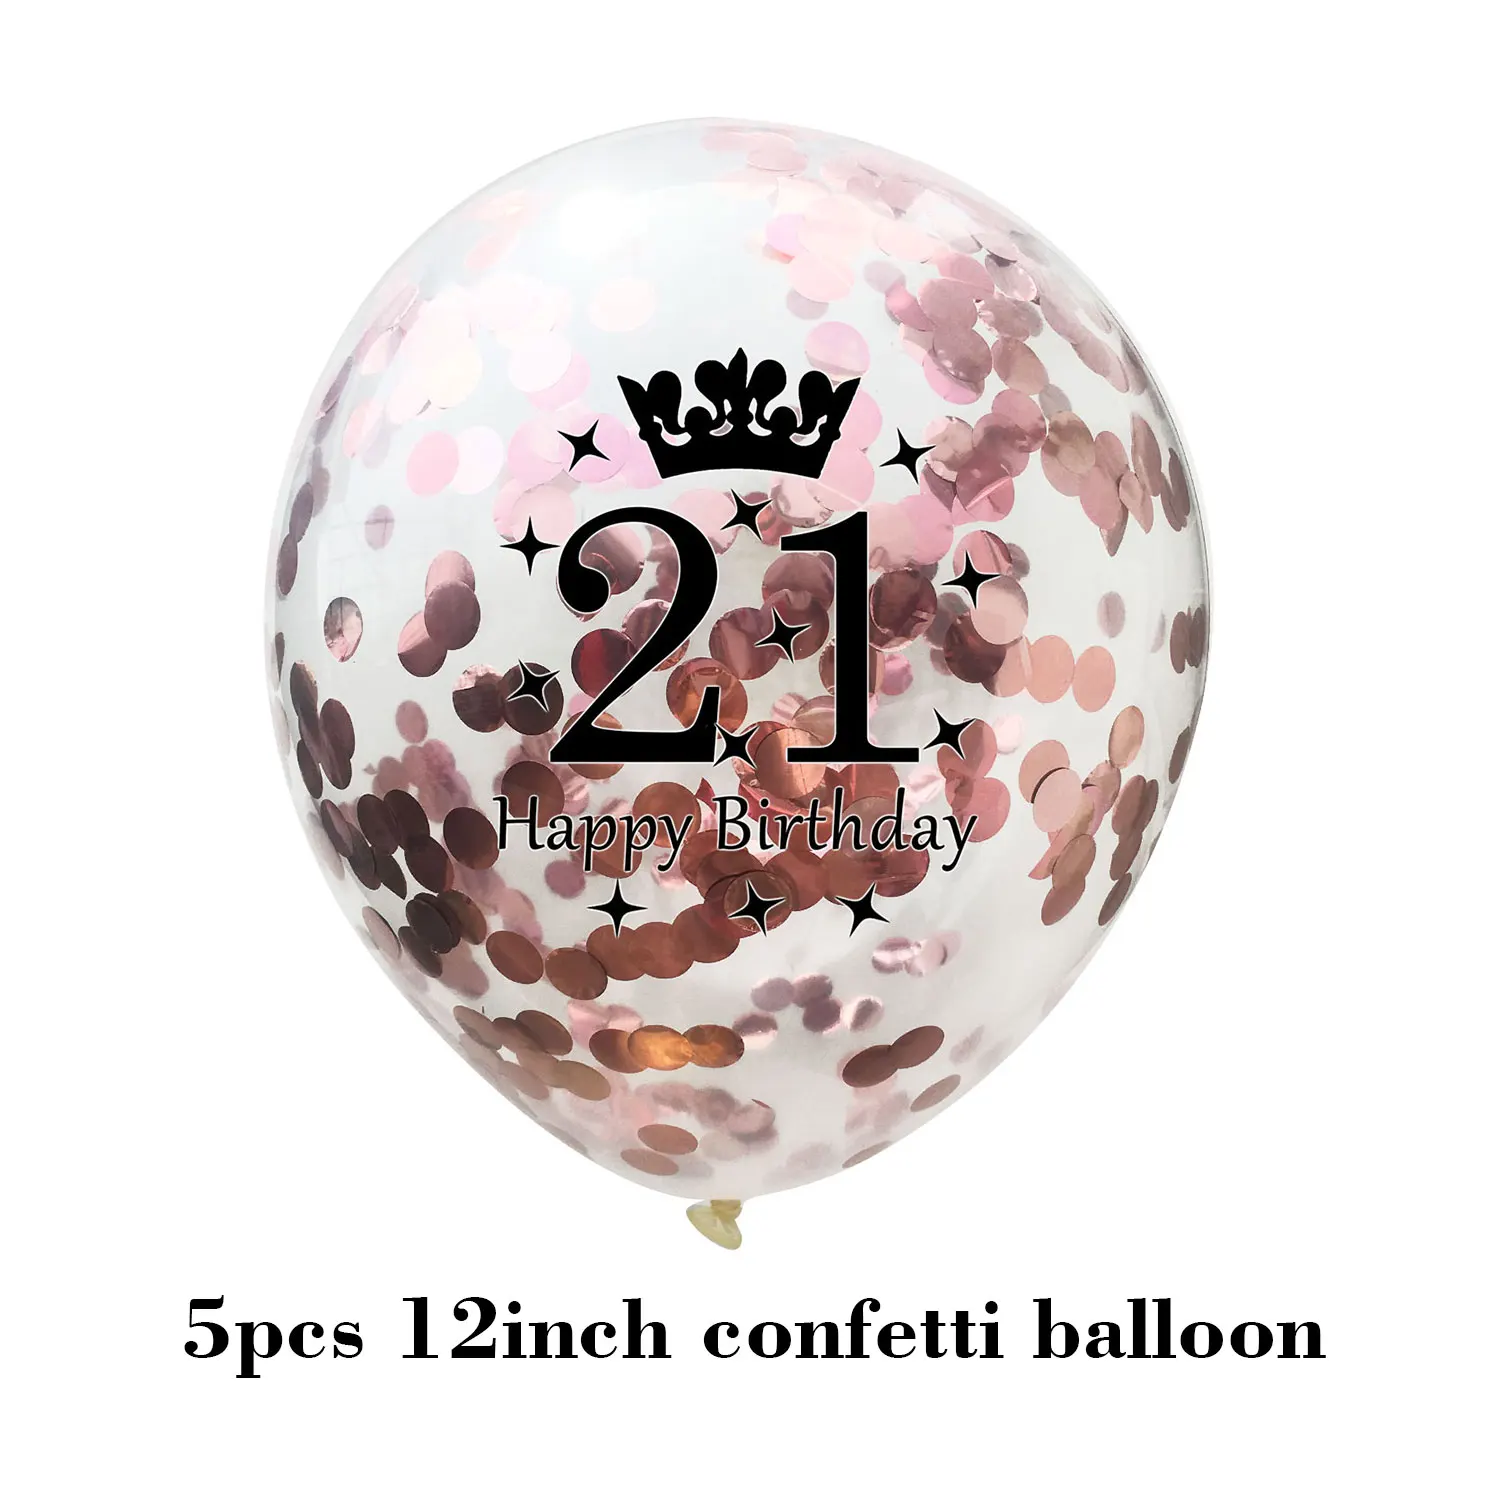 Happy Birthday Confetti Balloon Number Balloon Adult Birthday Cake Topper Gift Sticker For 16 18 21 30 40 50 60 Years Decoration - Цвет: 21 rose gold balloon